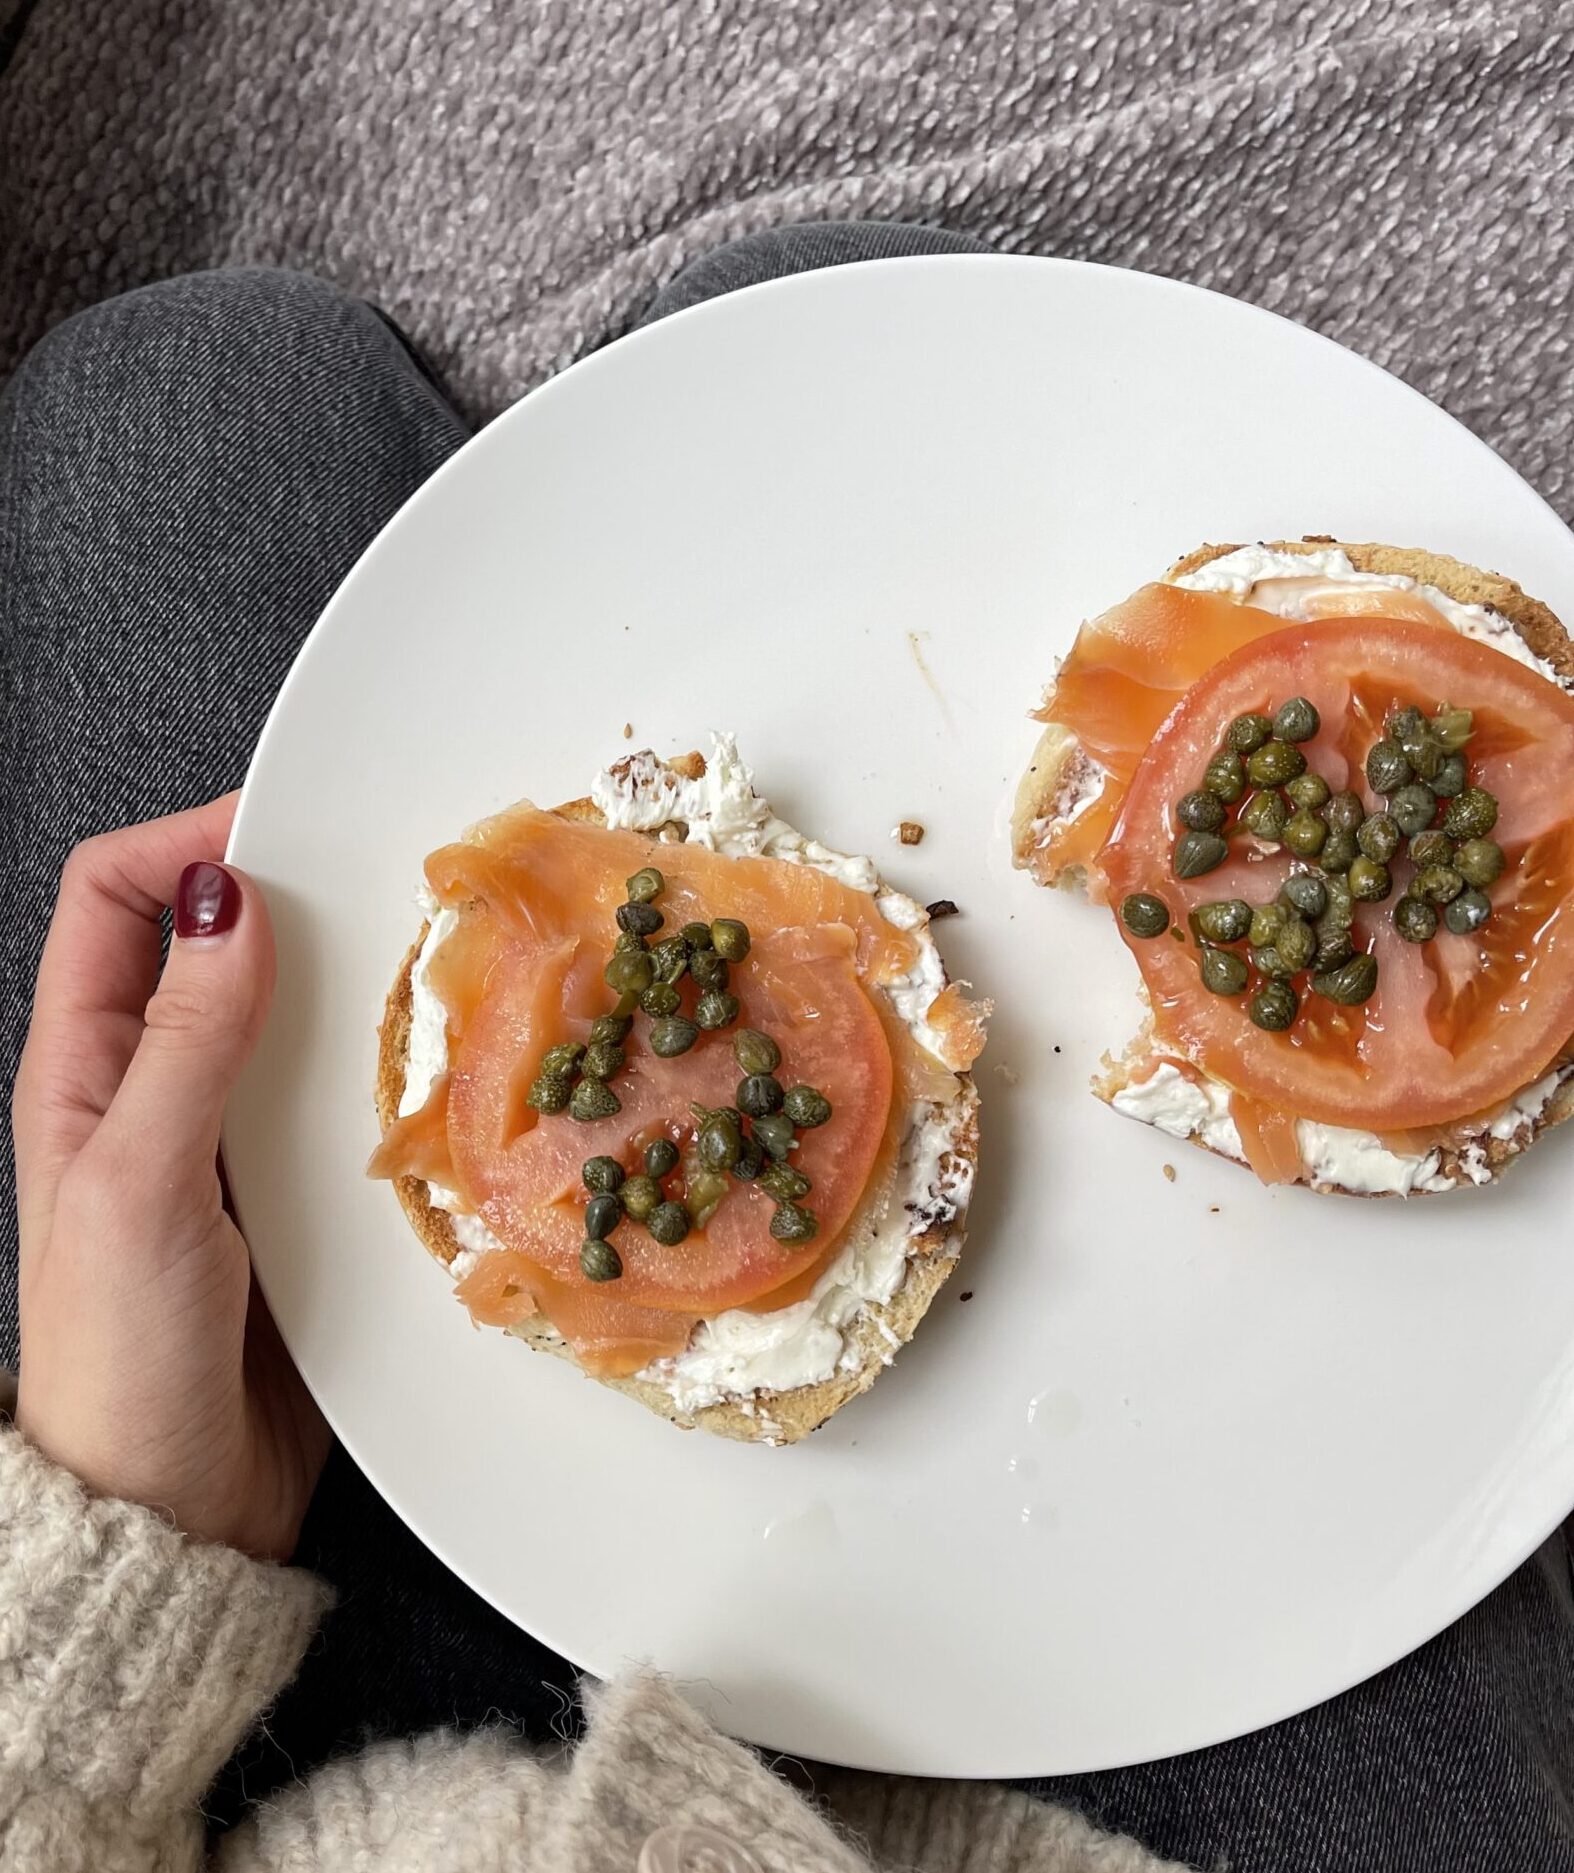 open faced lox bagel pic